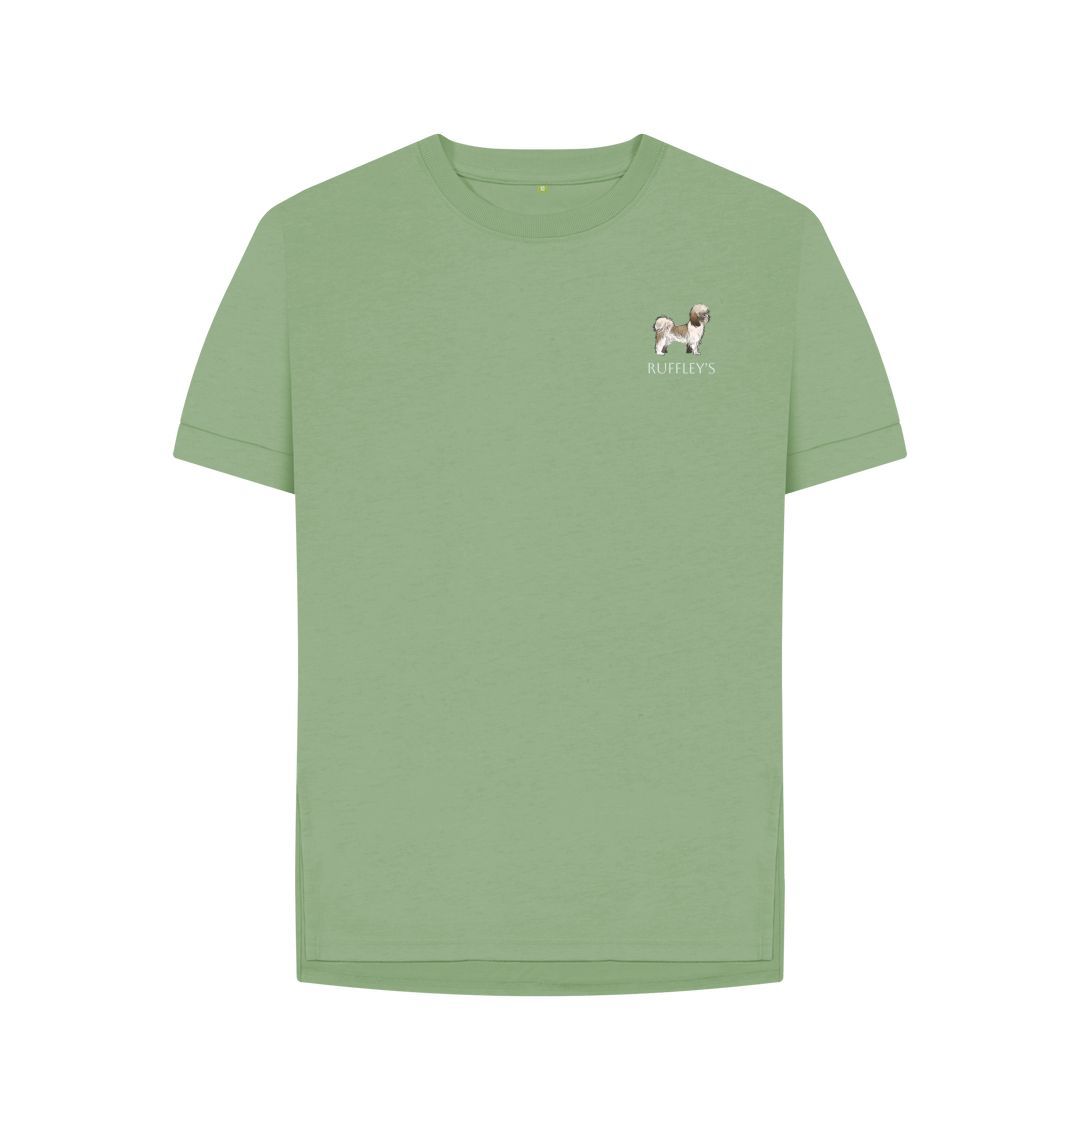 Sage Shih Tzu - Relaxed Fit T-Shirt